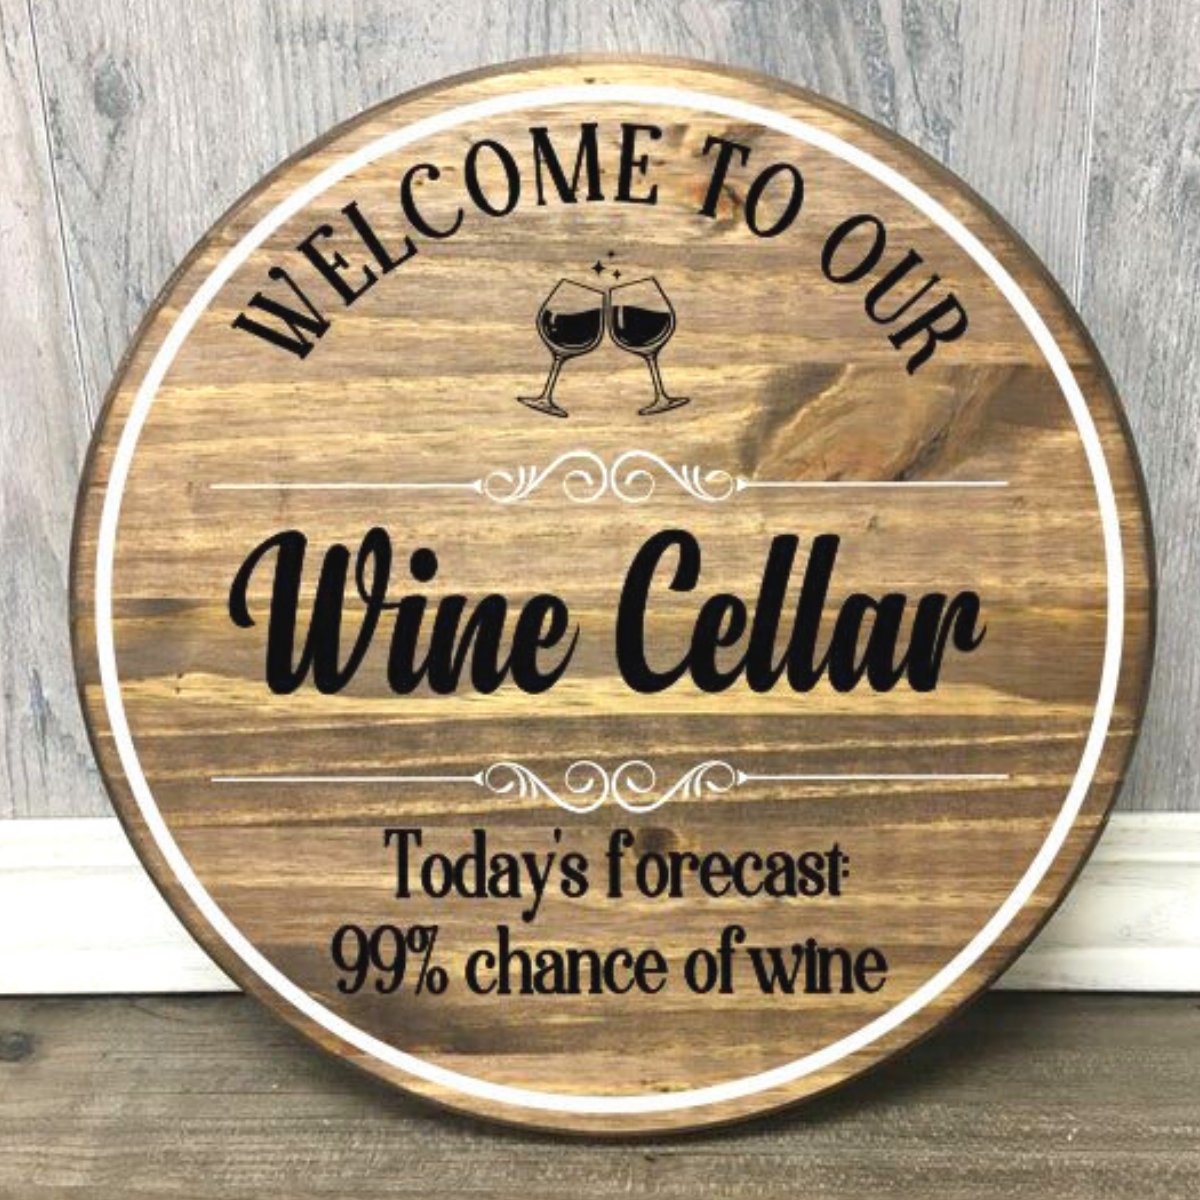 BUILD A WINE SIGN COLLECTION